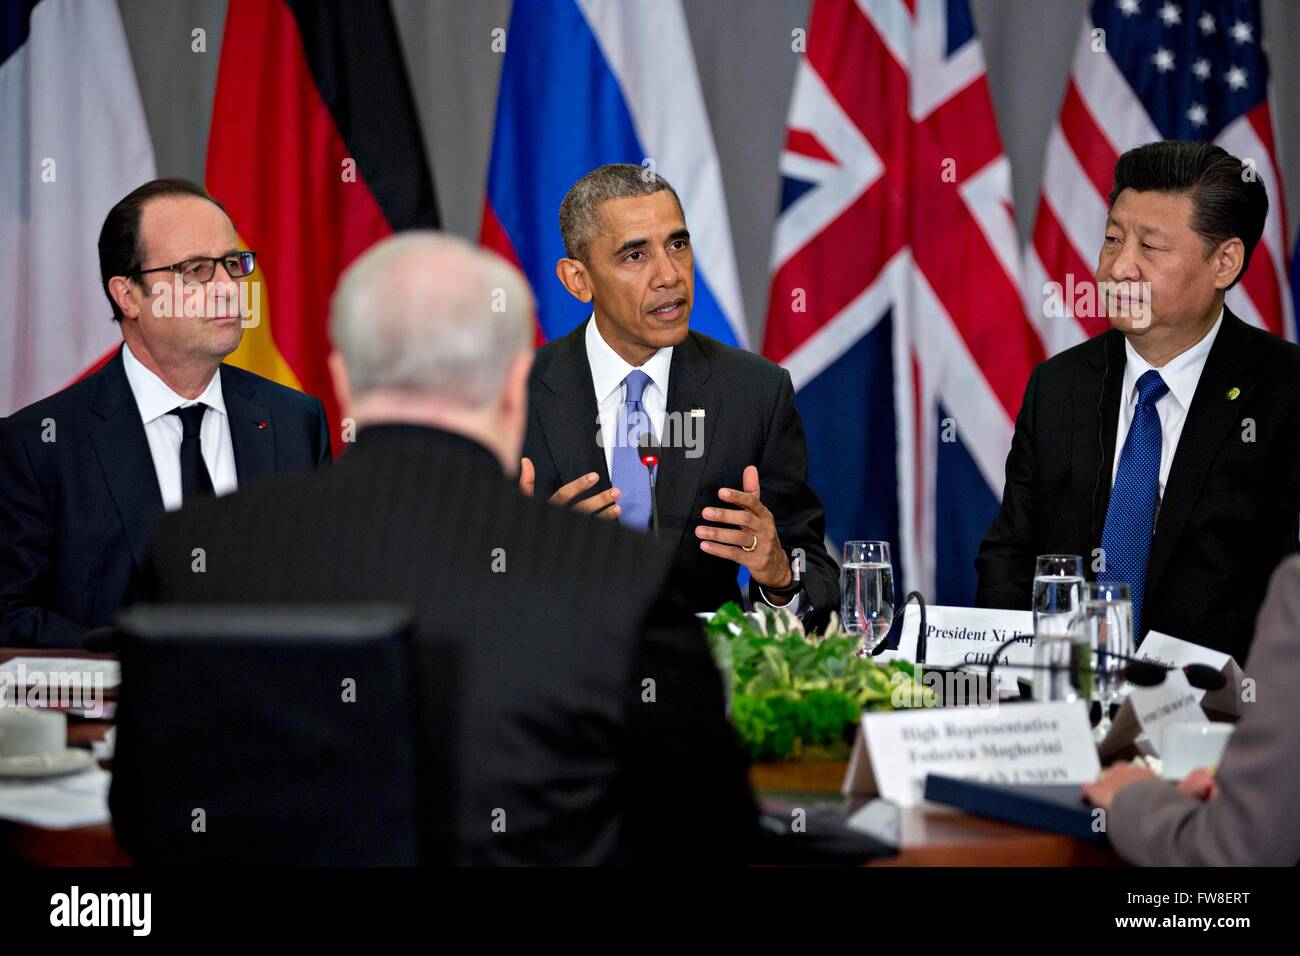 United States President Barack Obama, center, speaks as Xi Jinping, China's president, right, and Francois Hollande, France's president, left, listen during a P5 1 multilateral meeting at the Nuclear Security Summit in Washington, DC, U.S., on Friday, April 1. After a spate of terrorist attacks from Europe to Africa, Obama is rallying international support during the summit for an effort to keep Islamic State and similar groups from obtaining nuclear material and other weapons of mass destruction. Credit: Andrew Harrer/Pool via CNP - NO WIRE SERVICE - Stock Photo